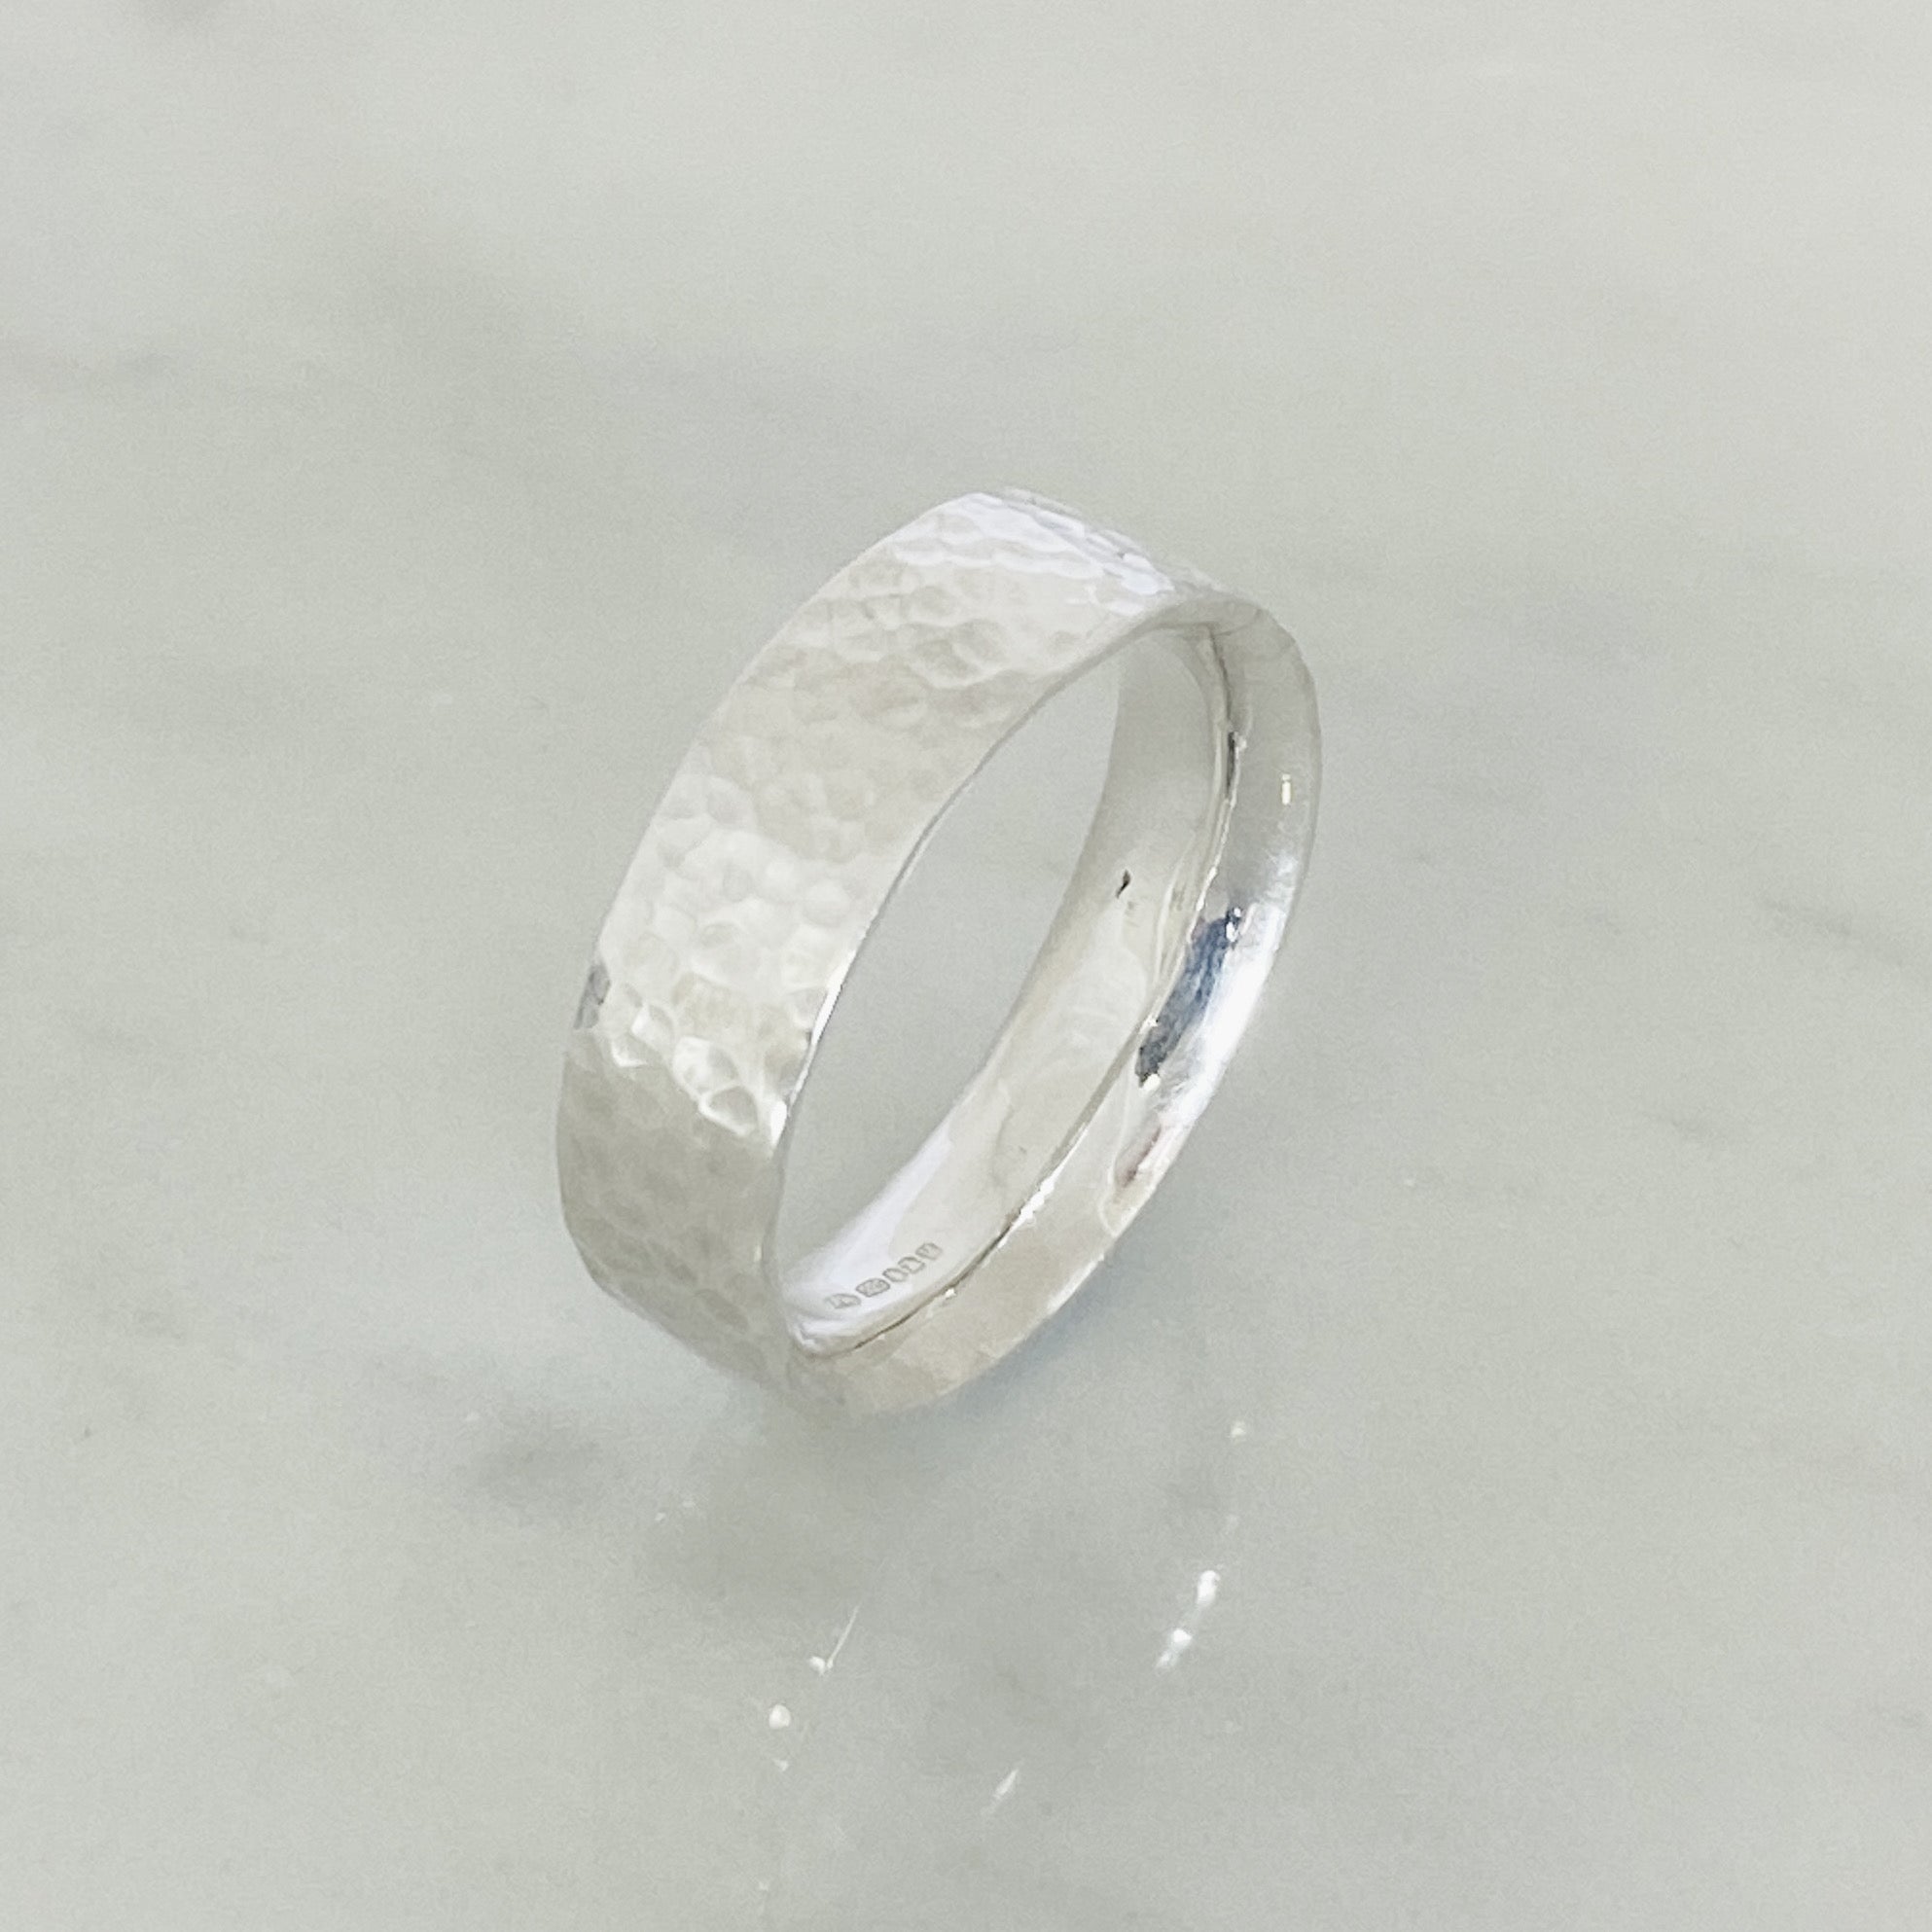 Silver Dimpled Wedding Ring